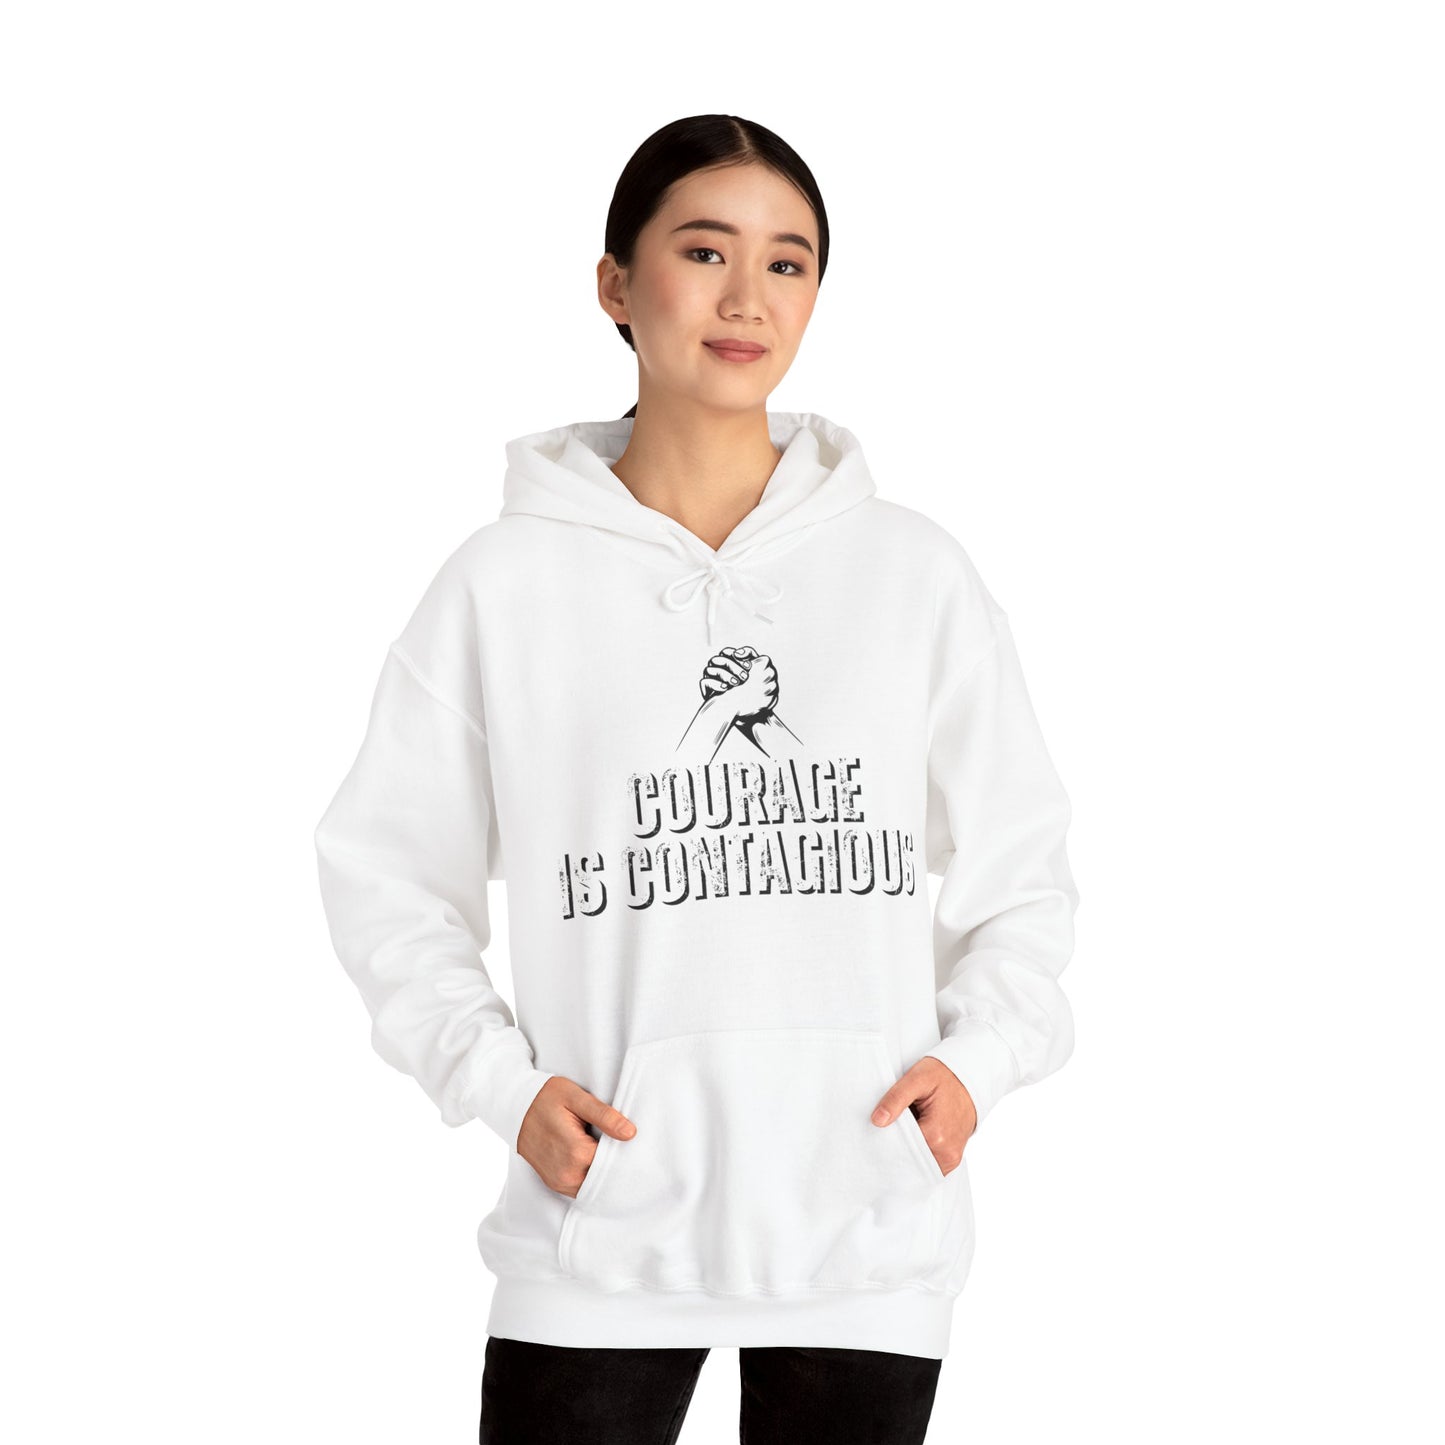 INSPIRED Women Courage is Contagious Heavy Blend Hooded Sweatshirt